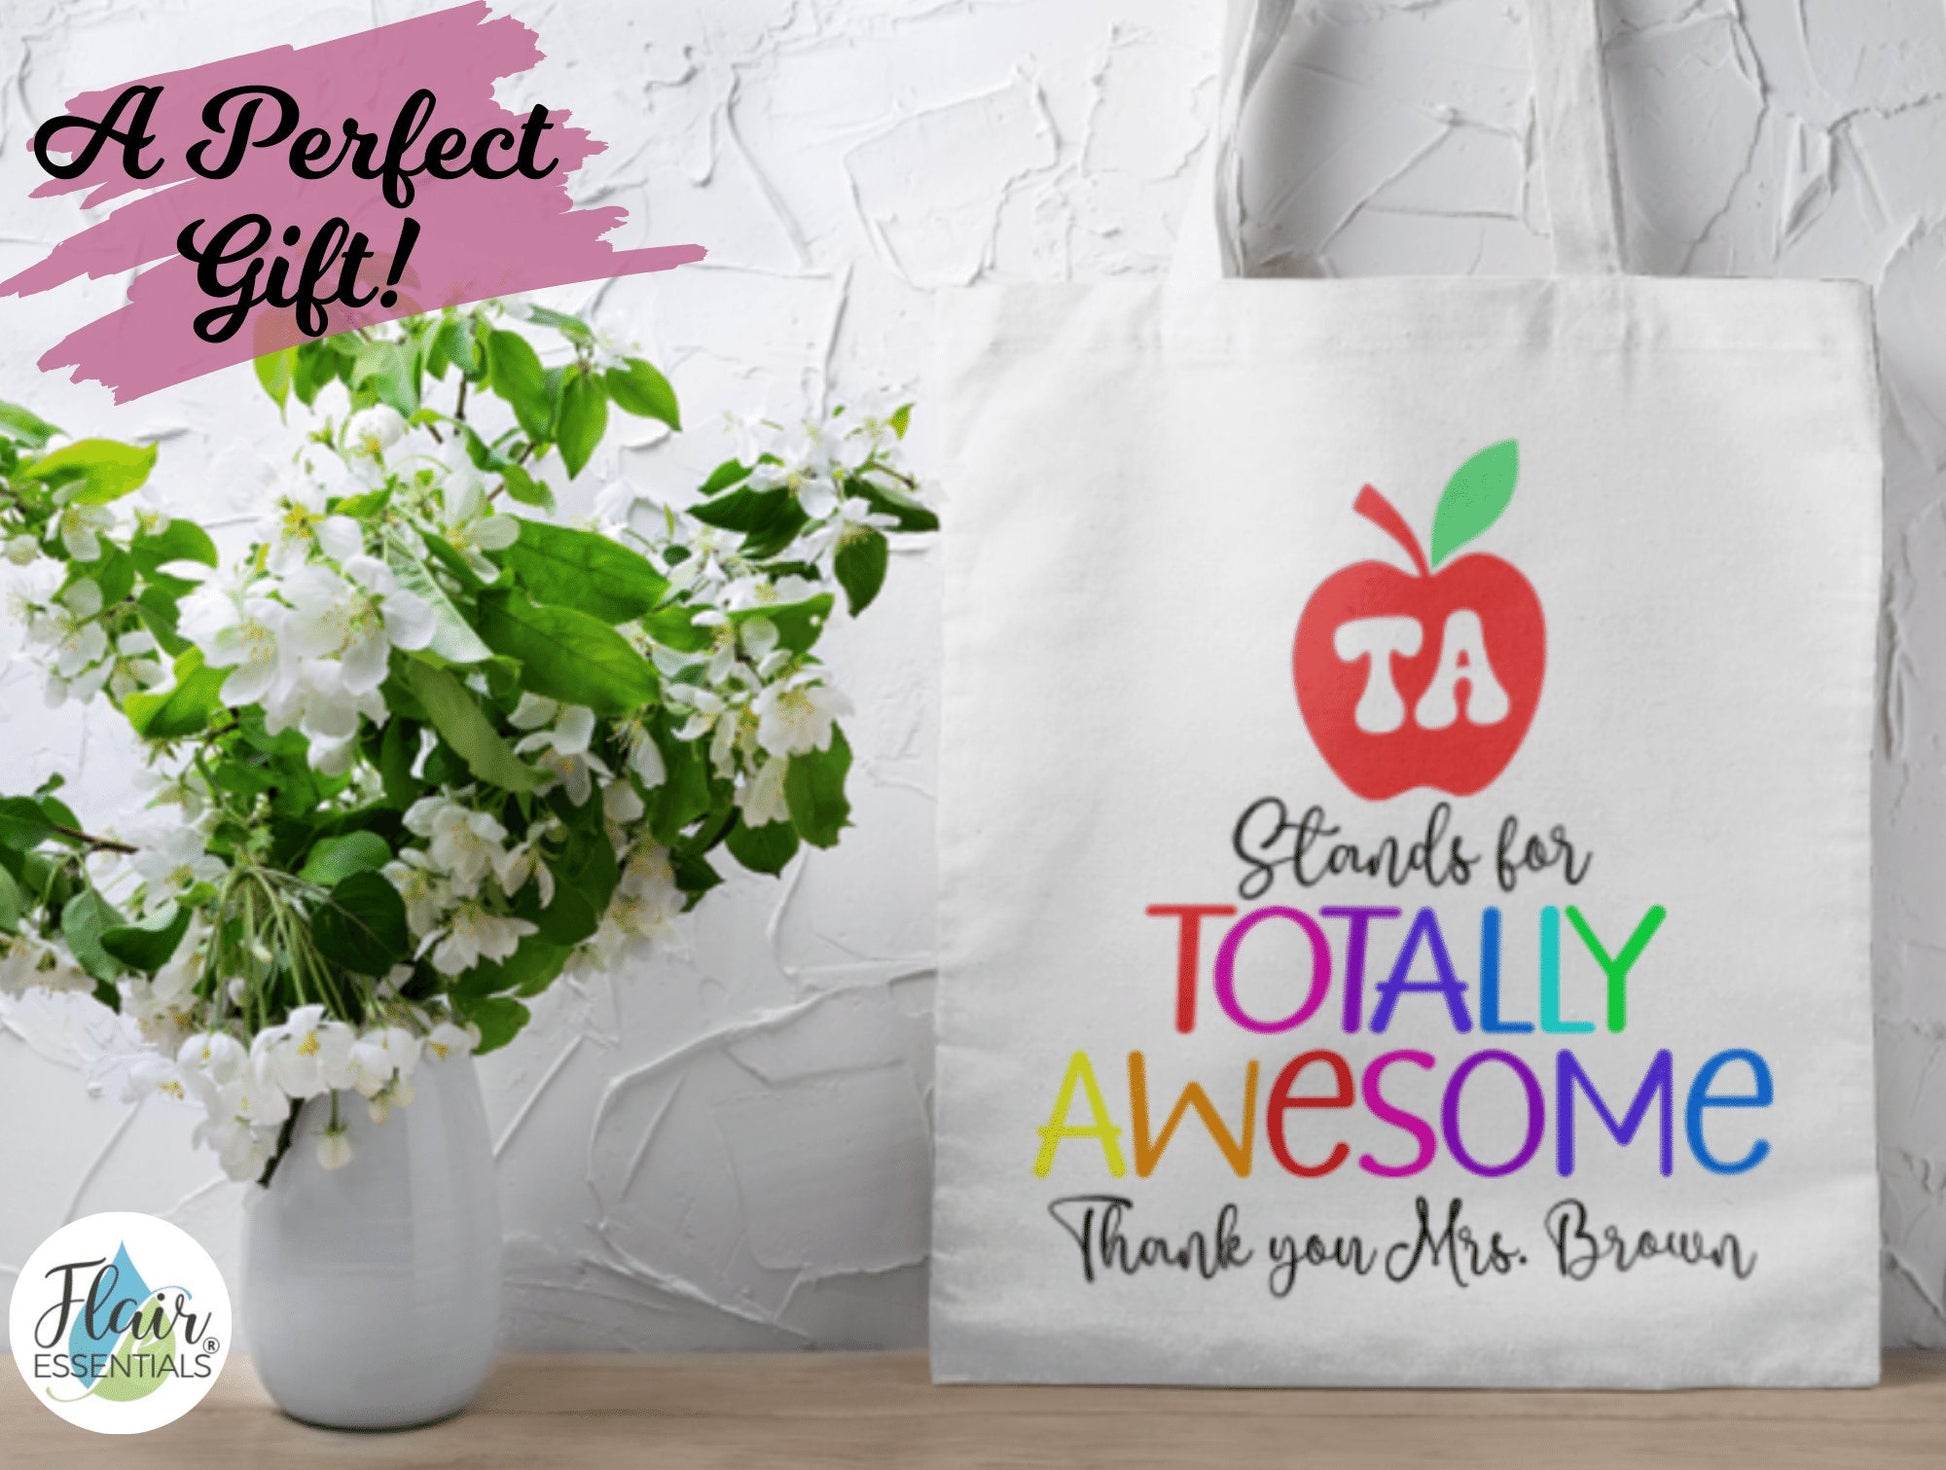 Personalised Teacher Tote Bag, Totally Awesome Tote Bag For Teachers Assistants Gift, Teaching Assistant, Gifts For Teacher Assistant